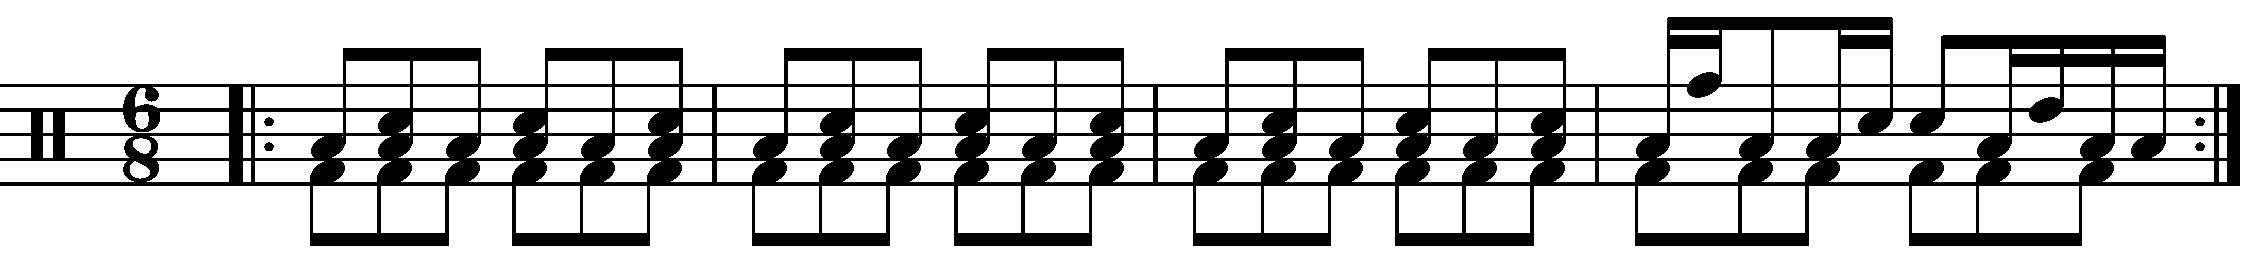 A four bar phrase in 6/8 based on patterns in double time